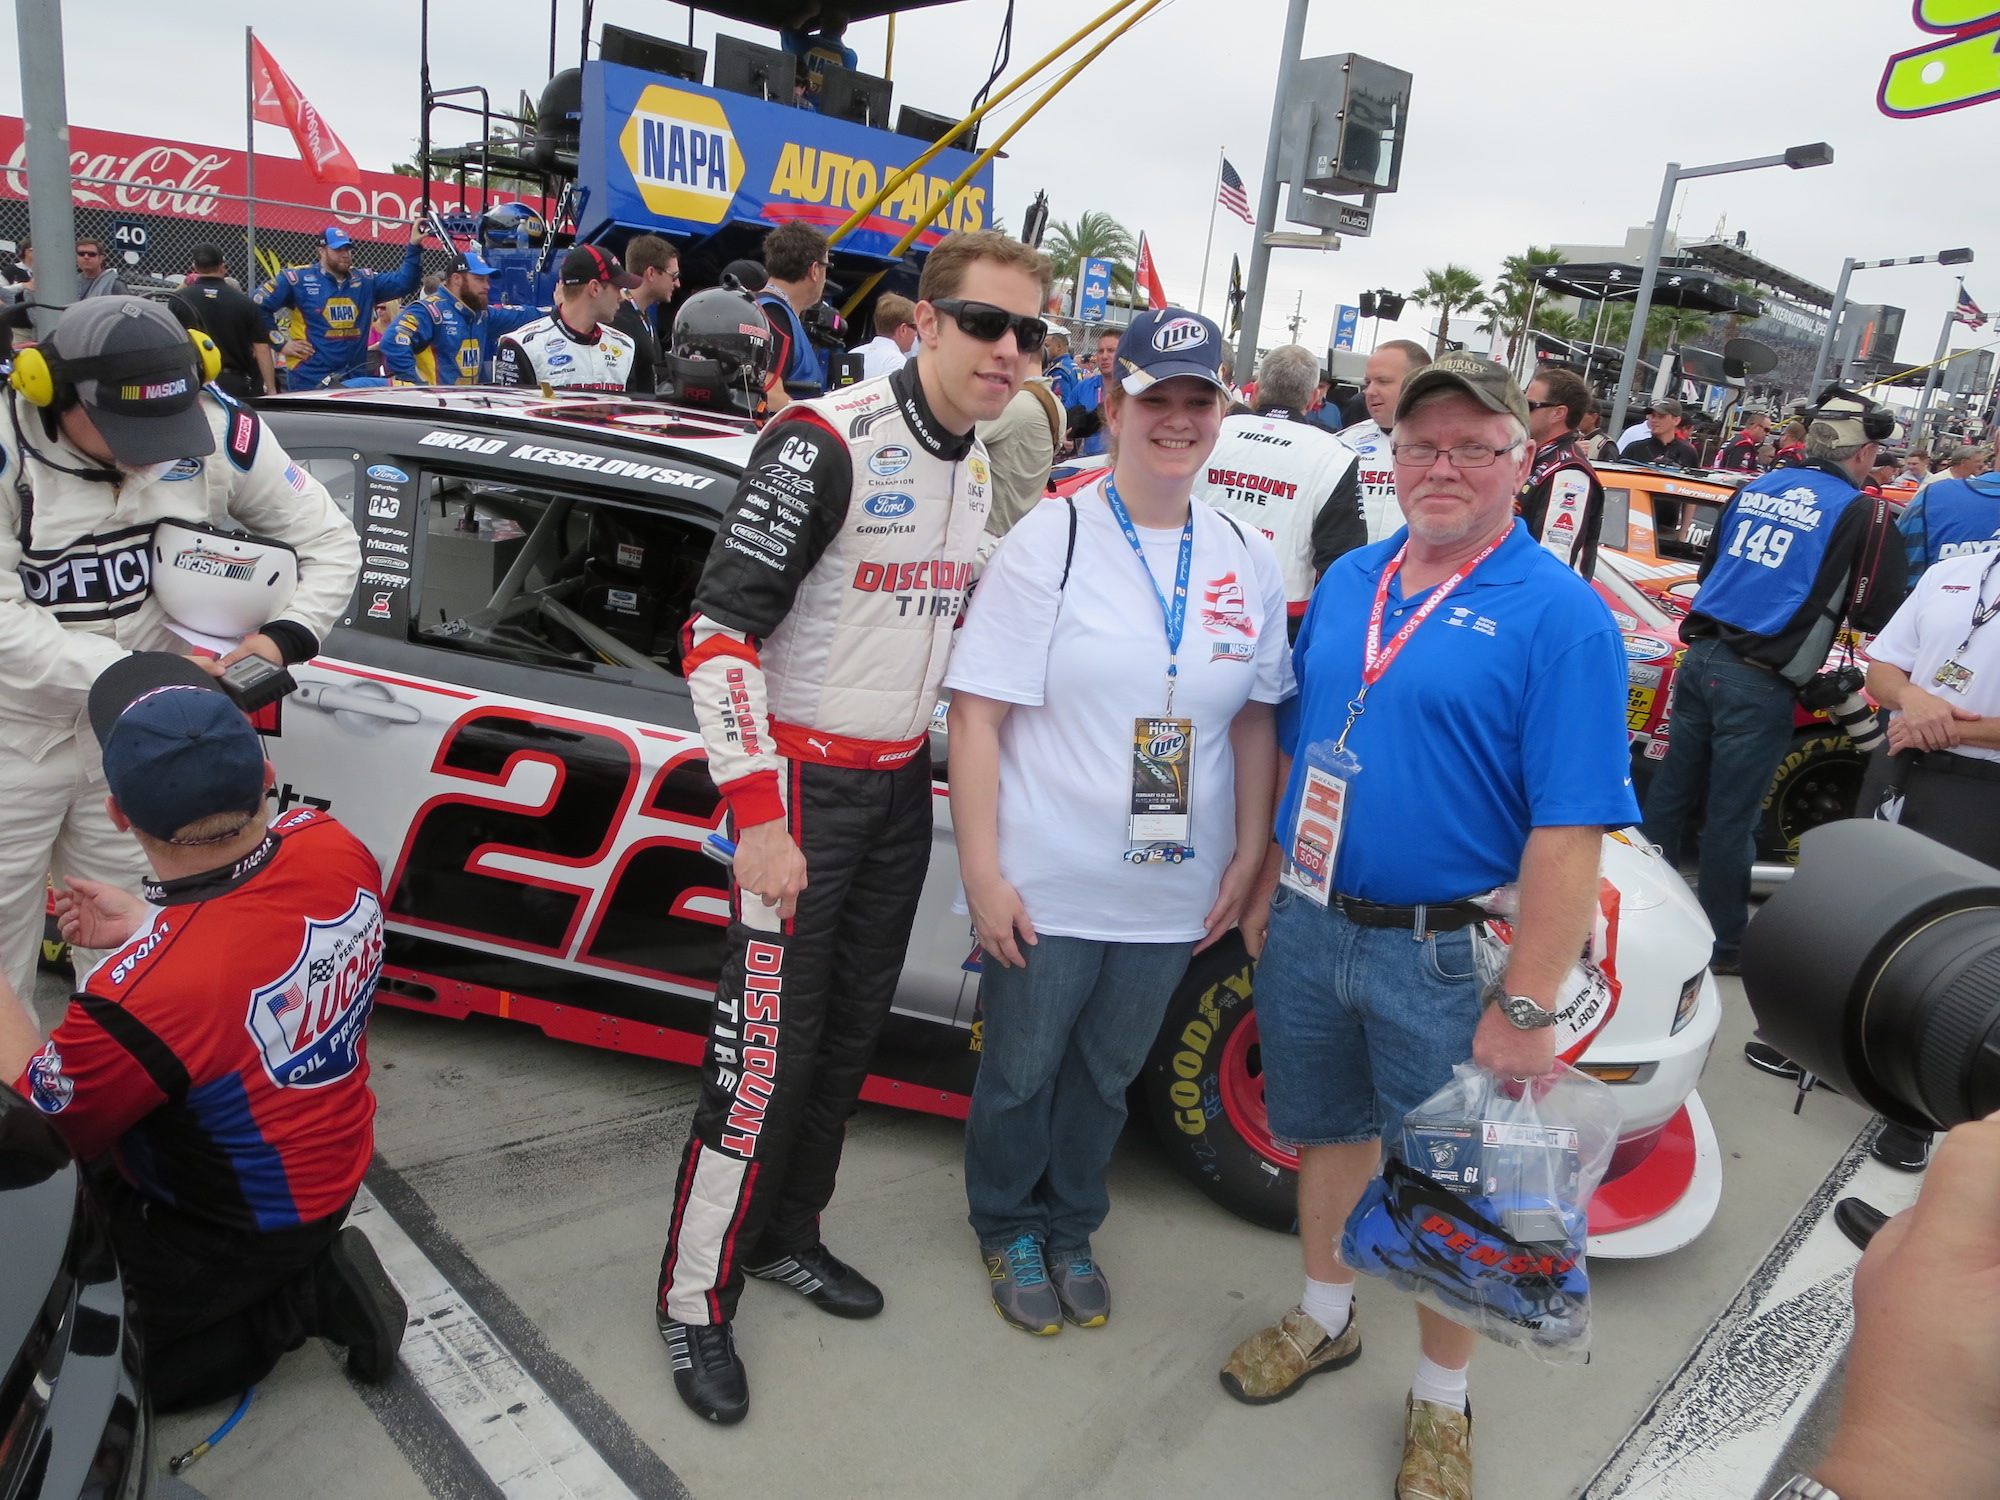 Meeting Brad on Pit Road before the Nationwide Race